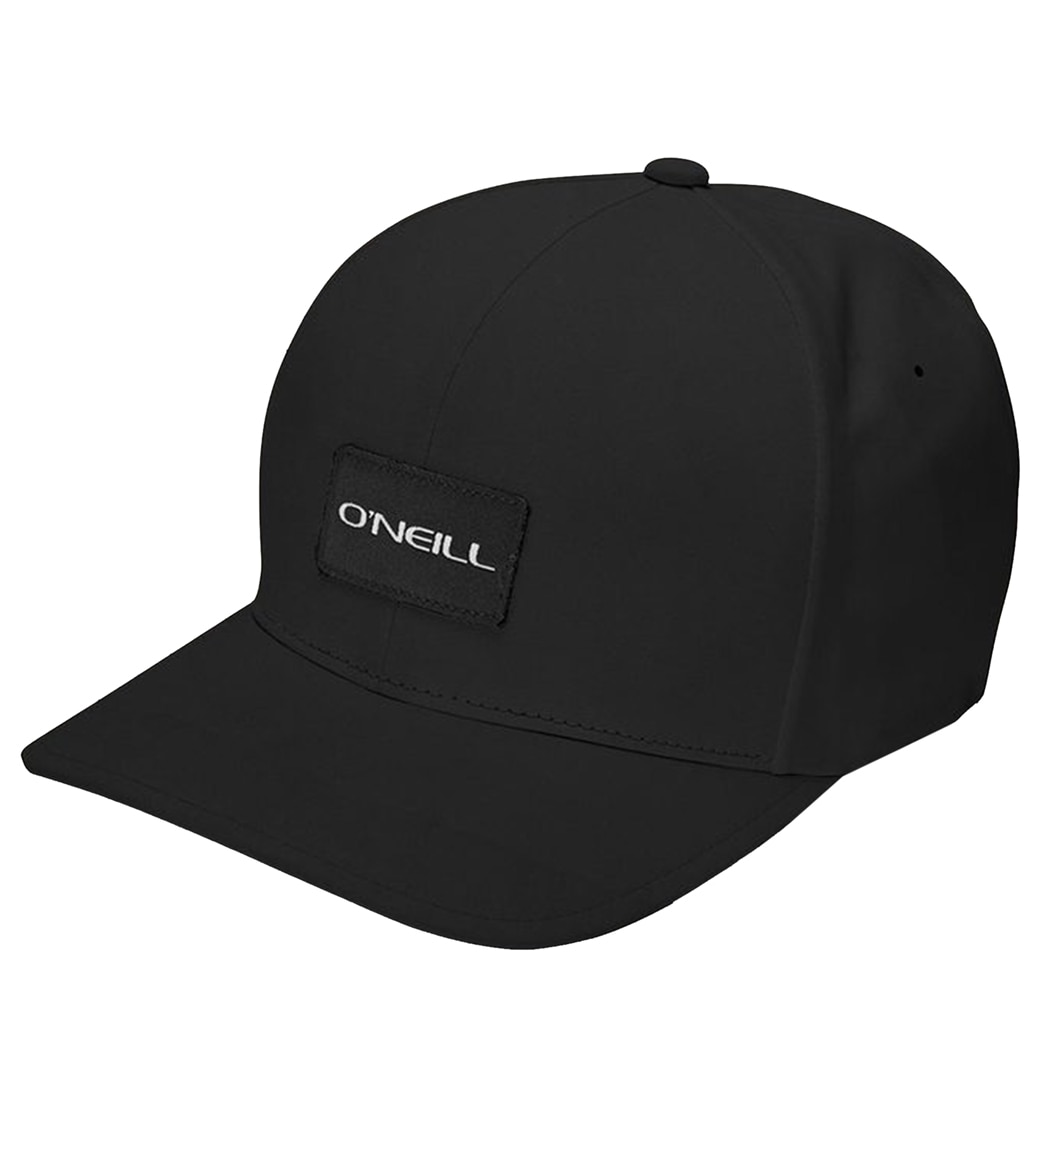 O'neill Men's Hybrid Hat - Black Solid Large/Xl Polyester - Swimoutlet.com